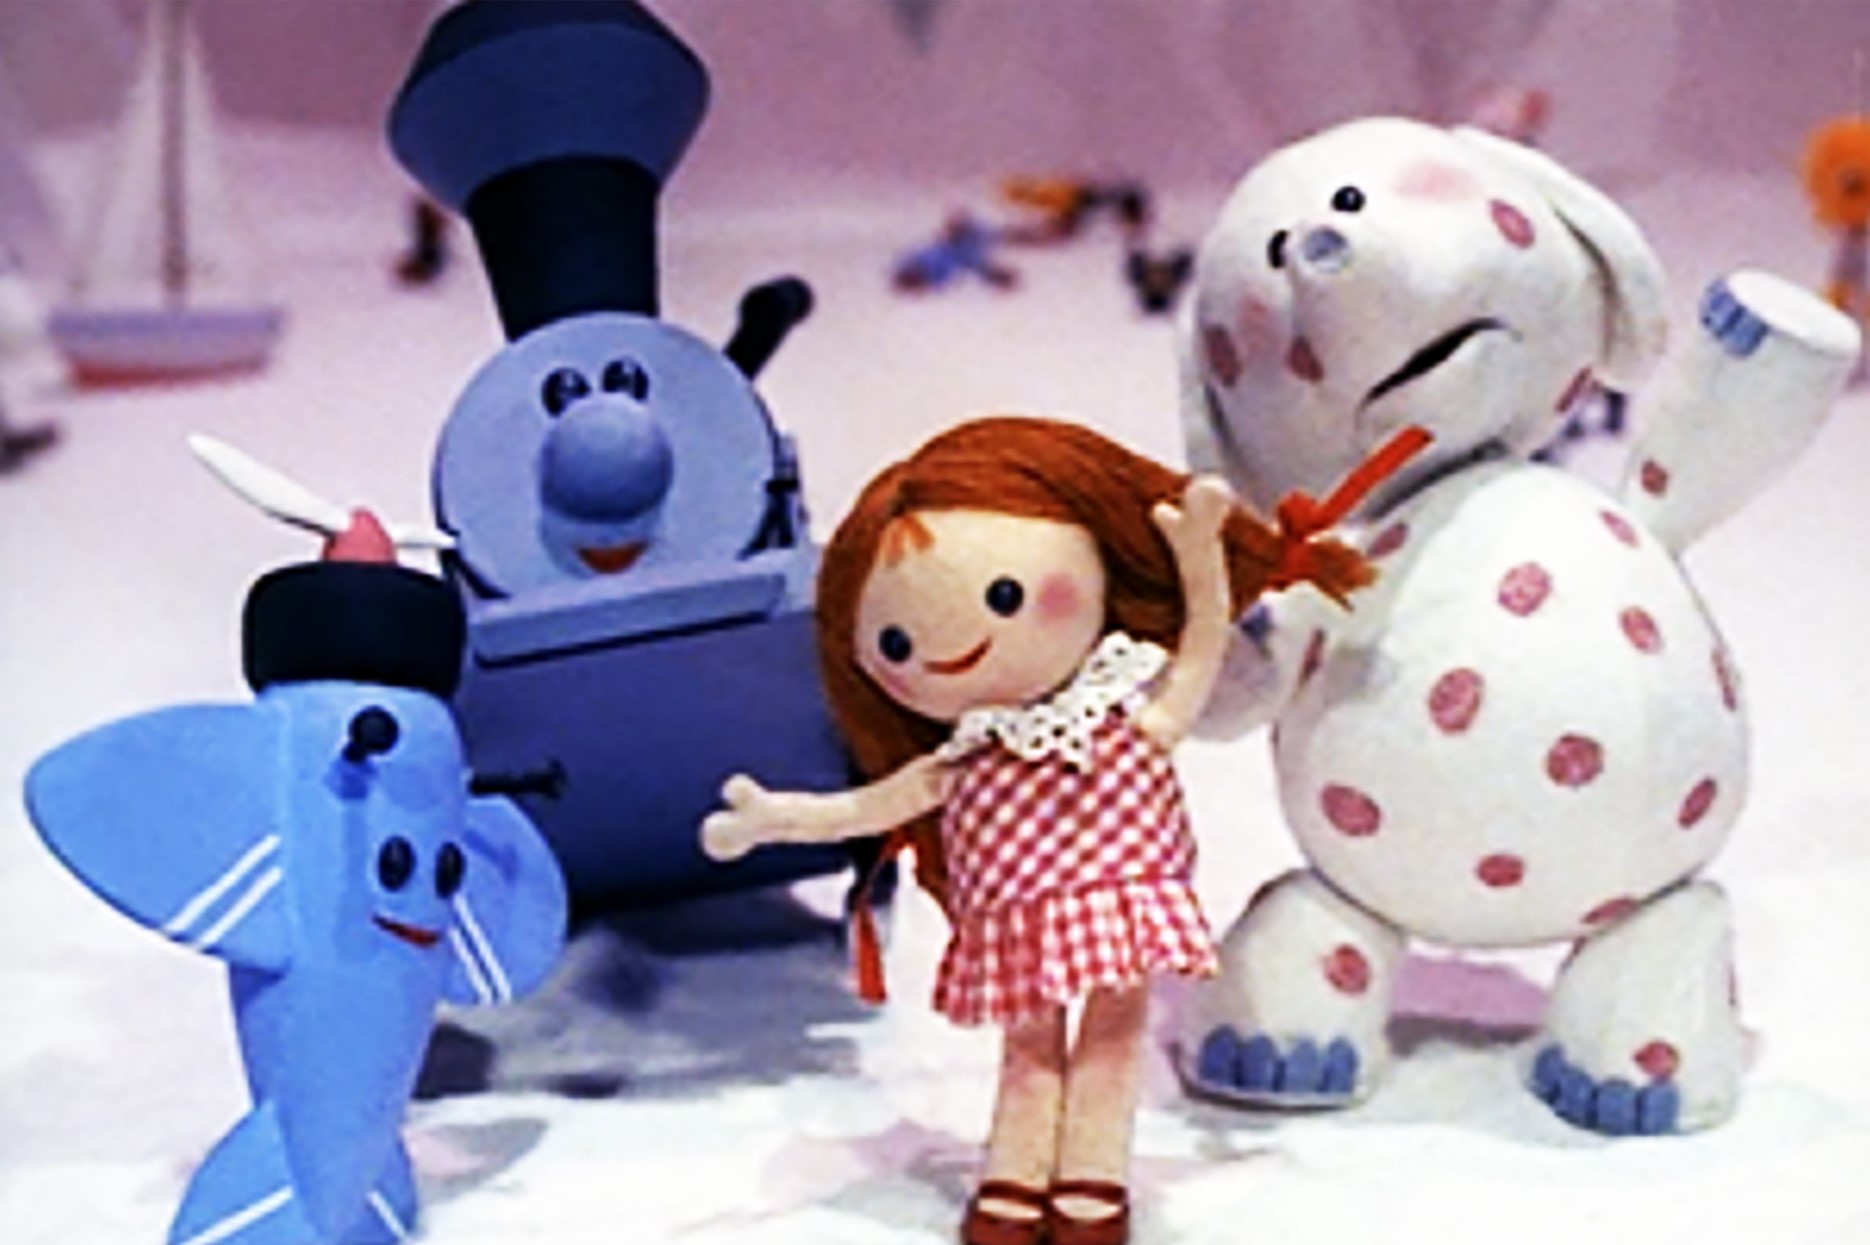 Scene from Rudolph movie featuring misfit toys singing